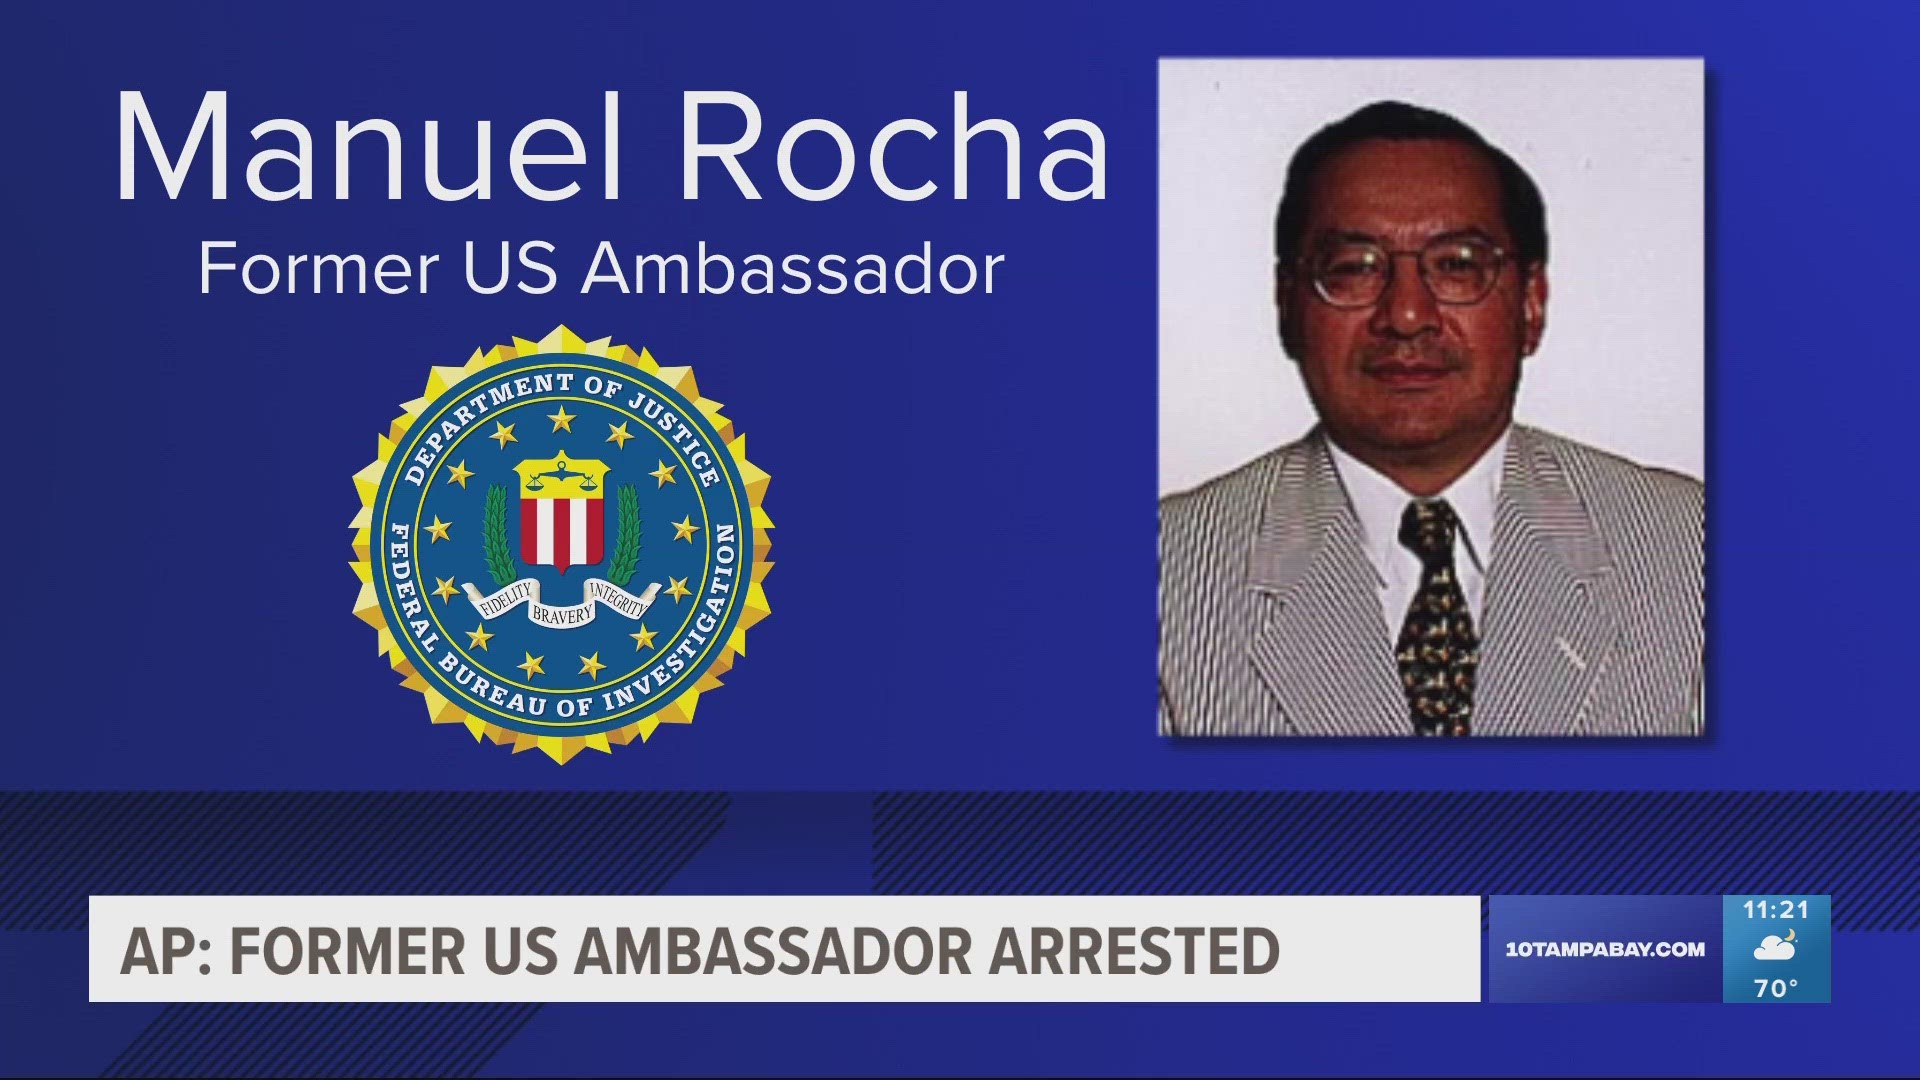 Manuel Rocha, 73, was arrested in Miami on Friday on a criminal complaint.